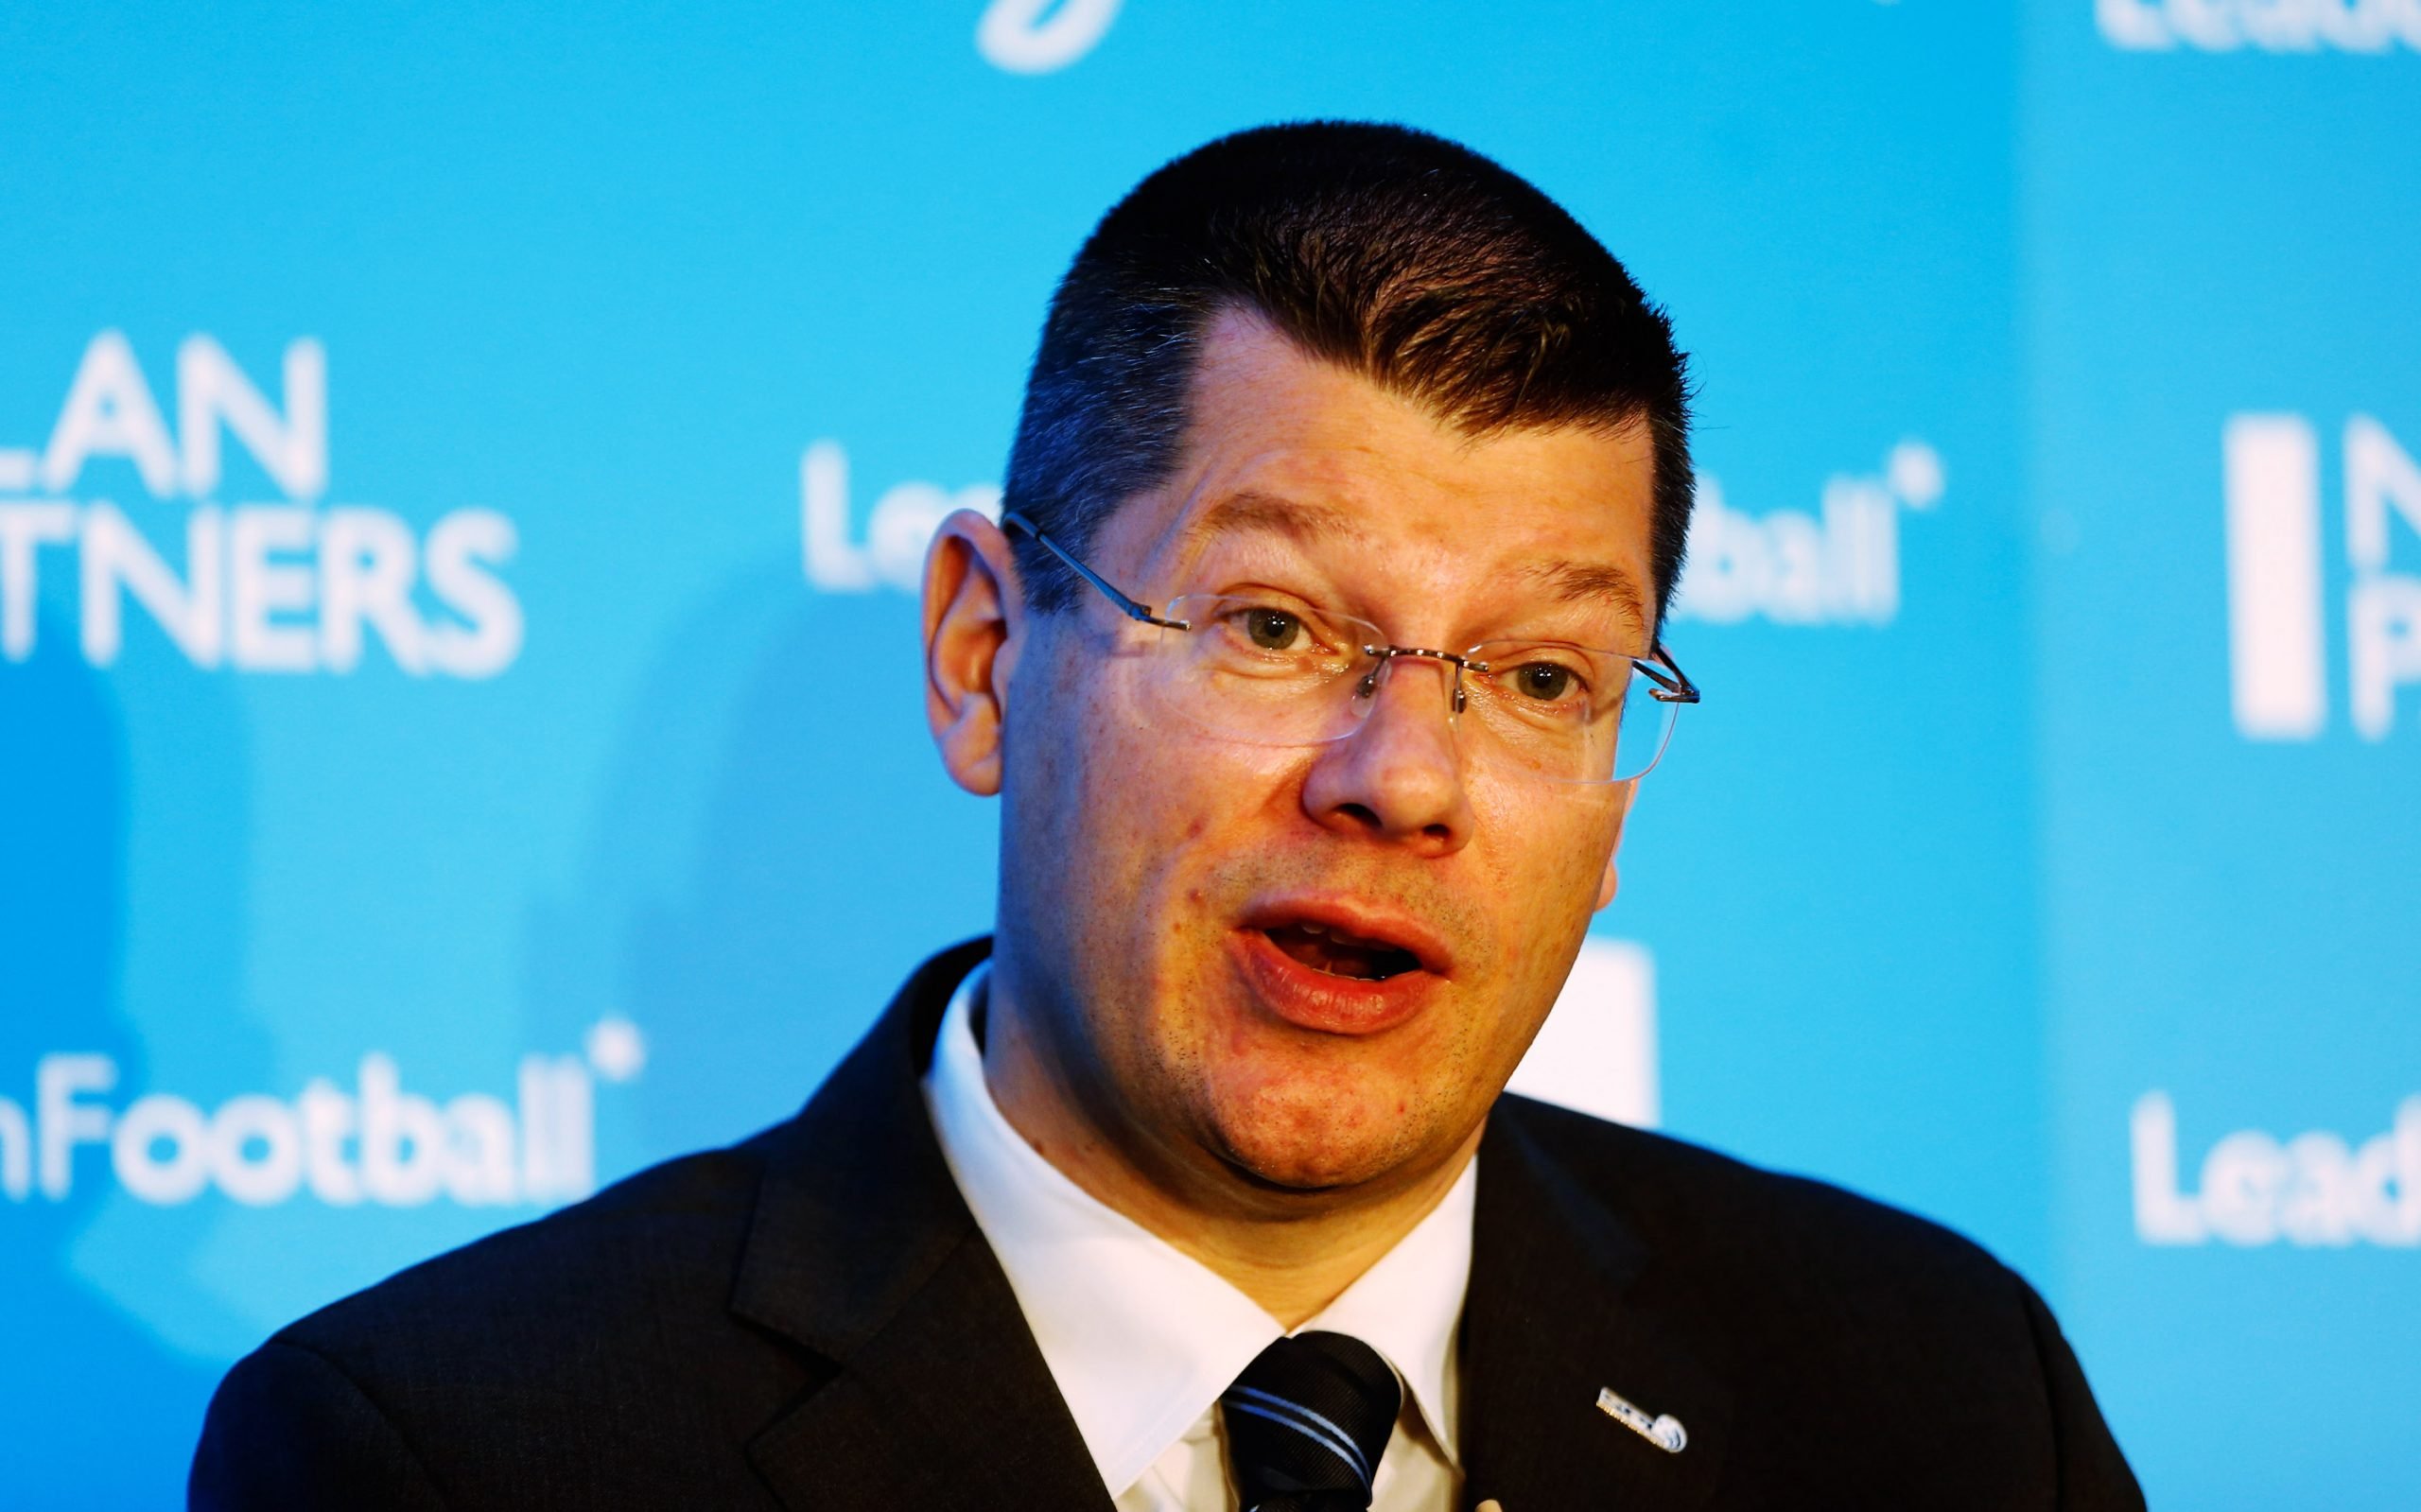 Neil Doncaster a key figure of Scottish football